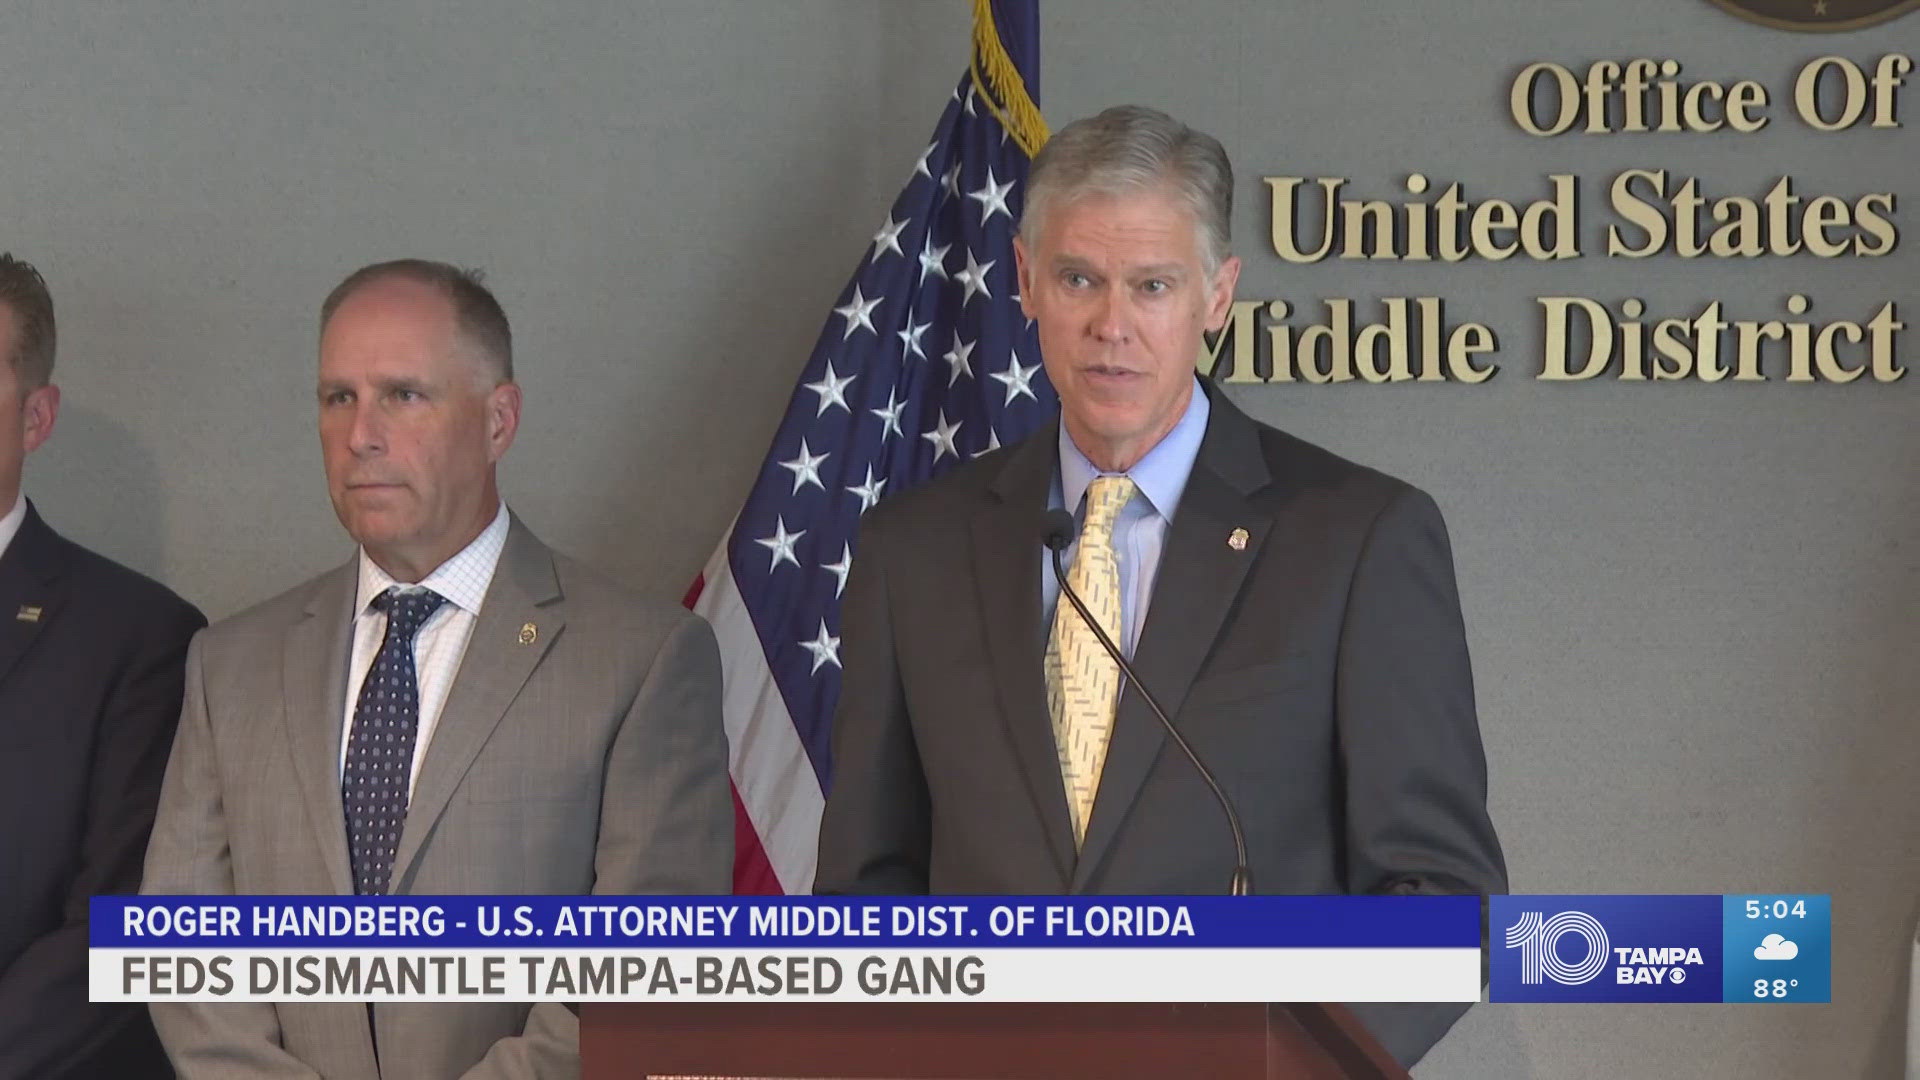 The six gang members were based in Tampa but committed crimes spanning the state and country, according to U.S. attorney.